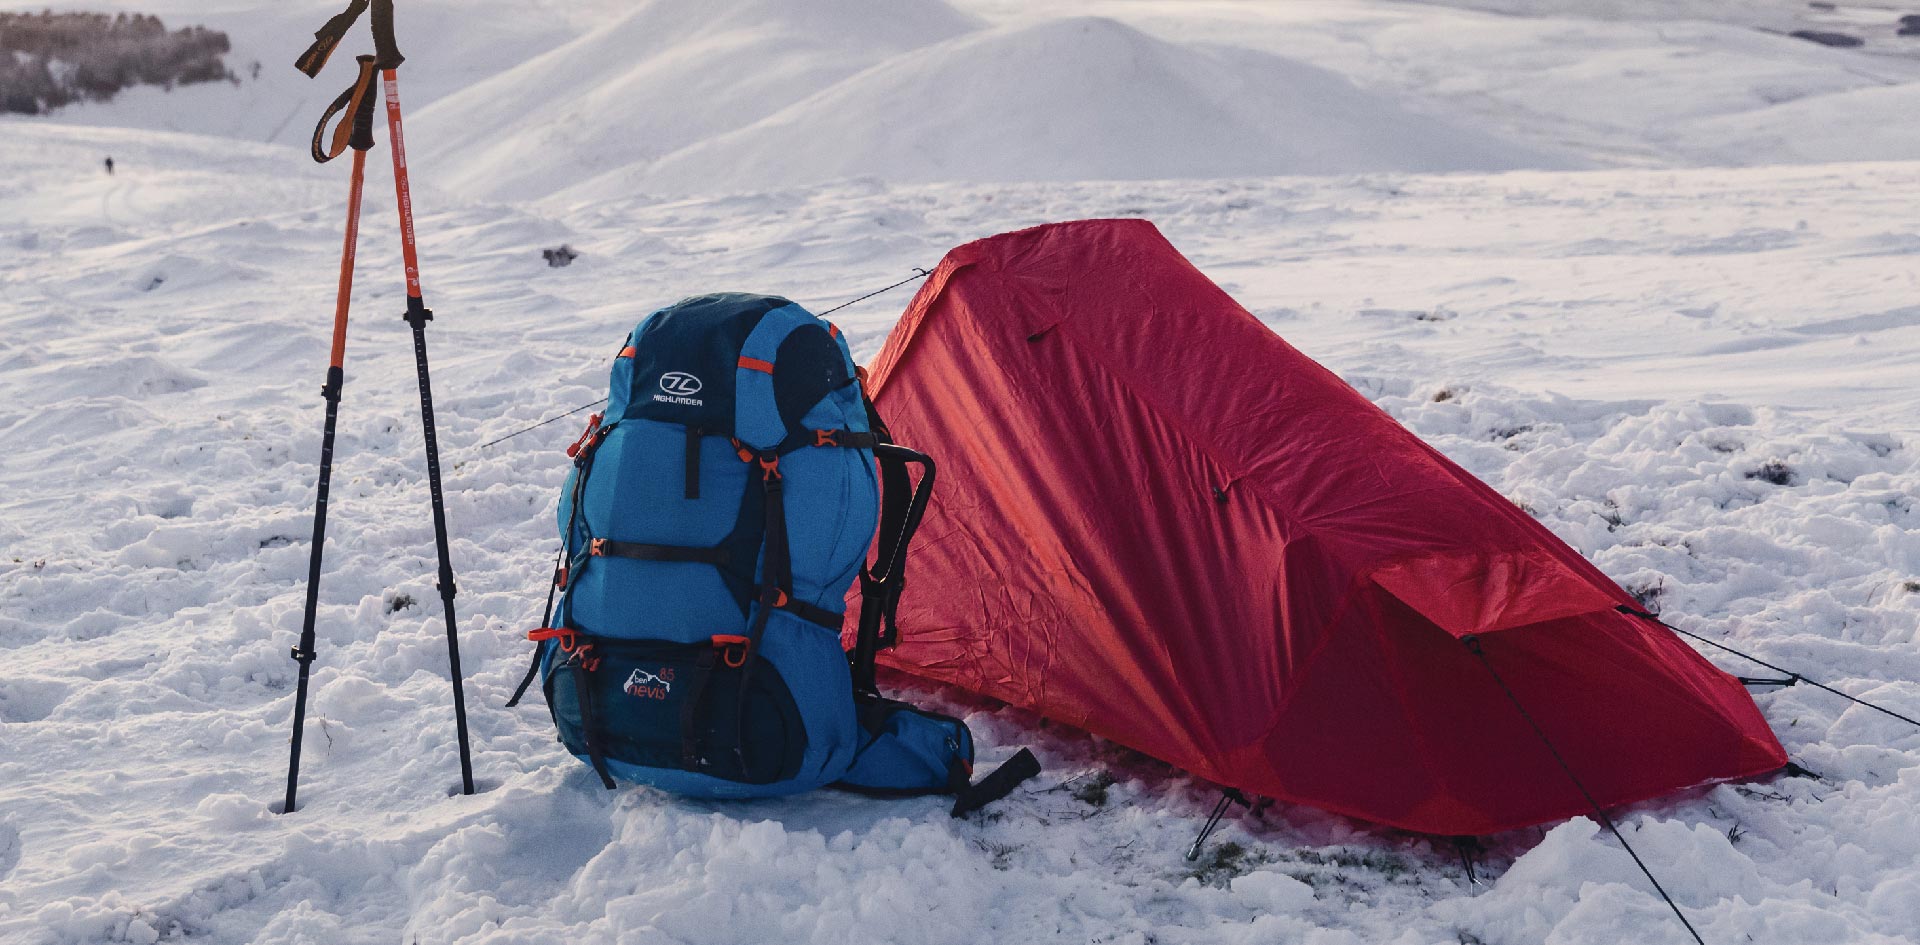 Winter Camping - 12 Tips for Camping in the Depths of Winter